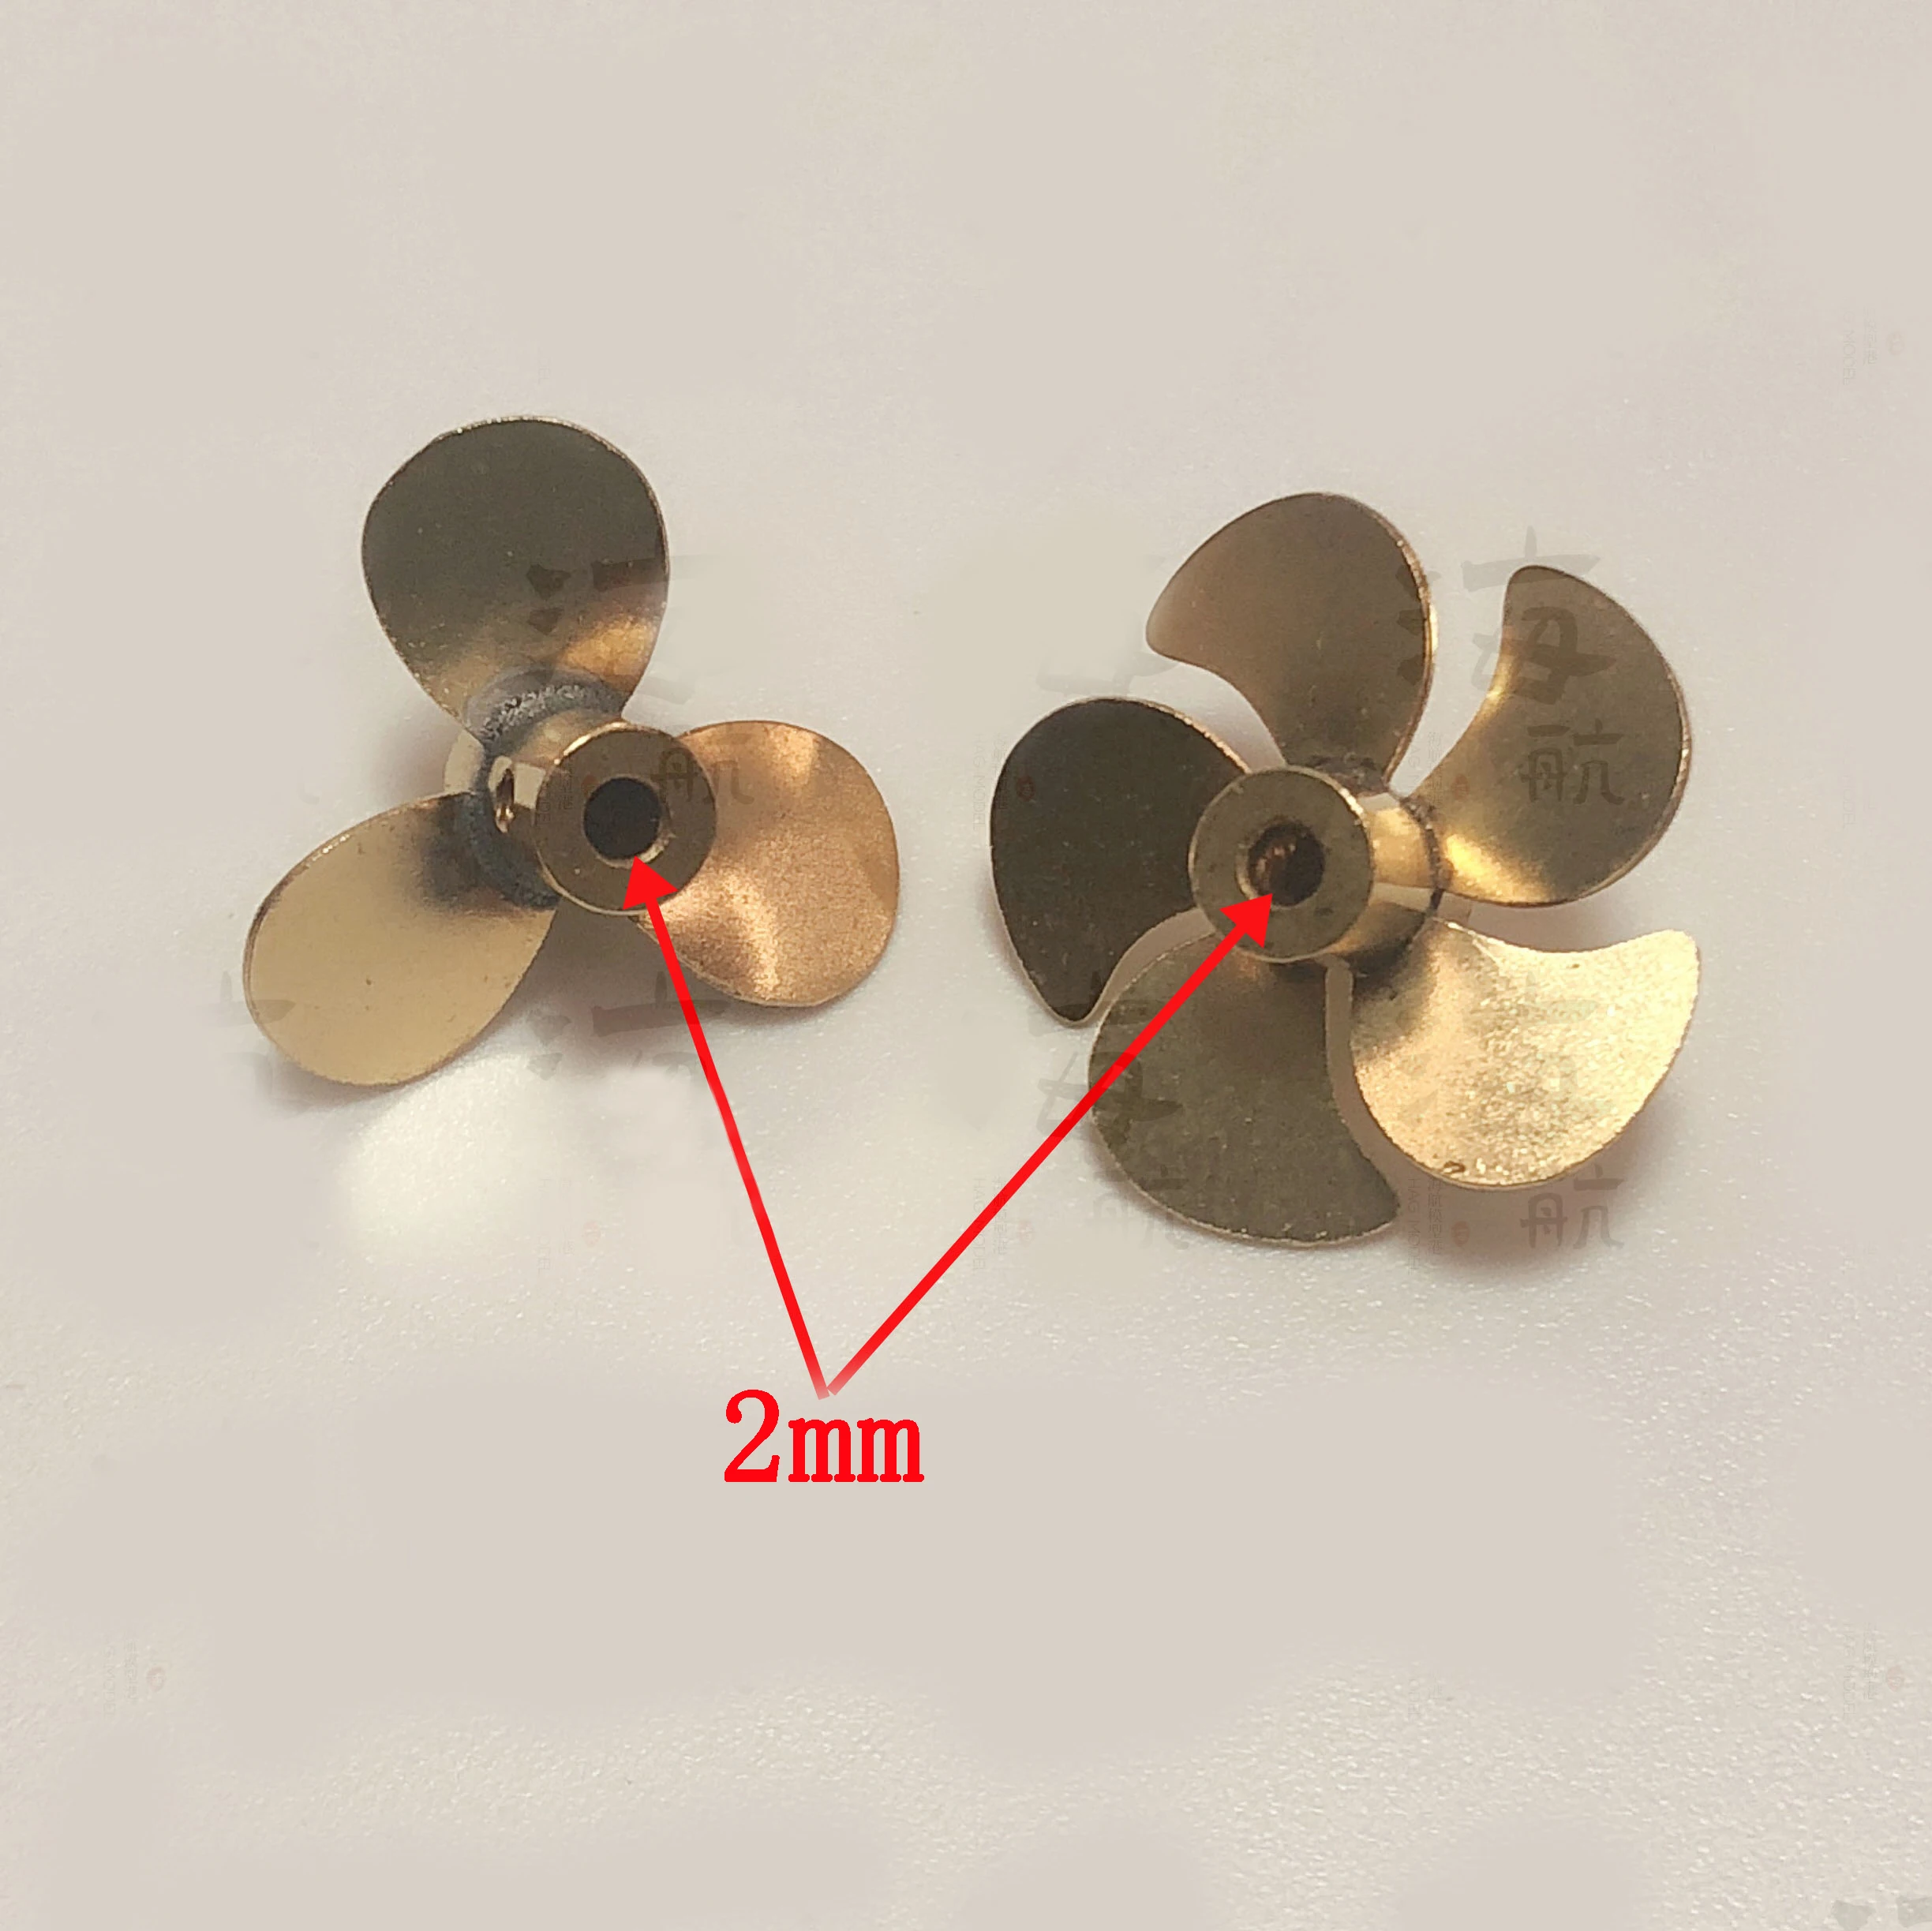 Brass 3 Blade Propeller M3 20mm Right Hand Side For Scale Model Boats 146-01 